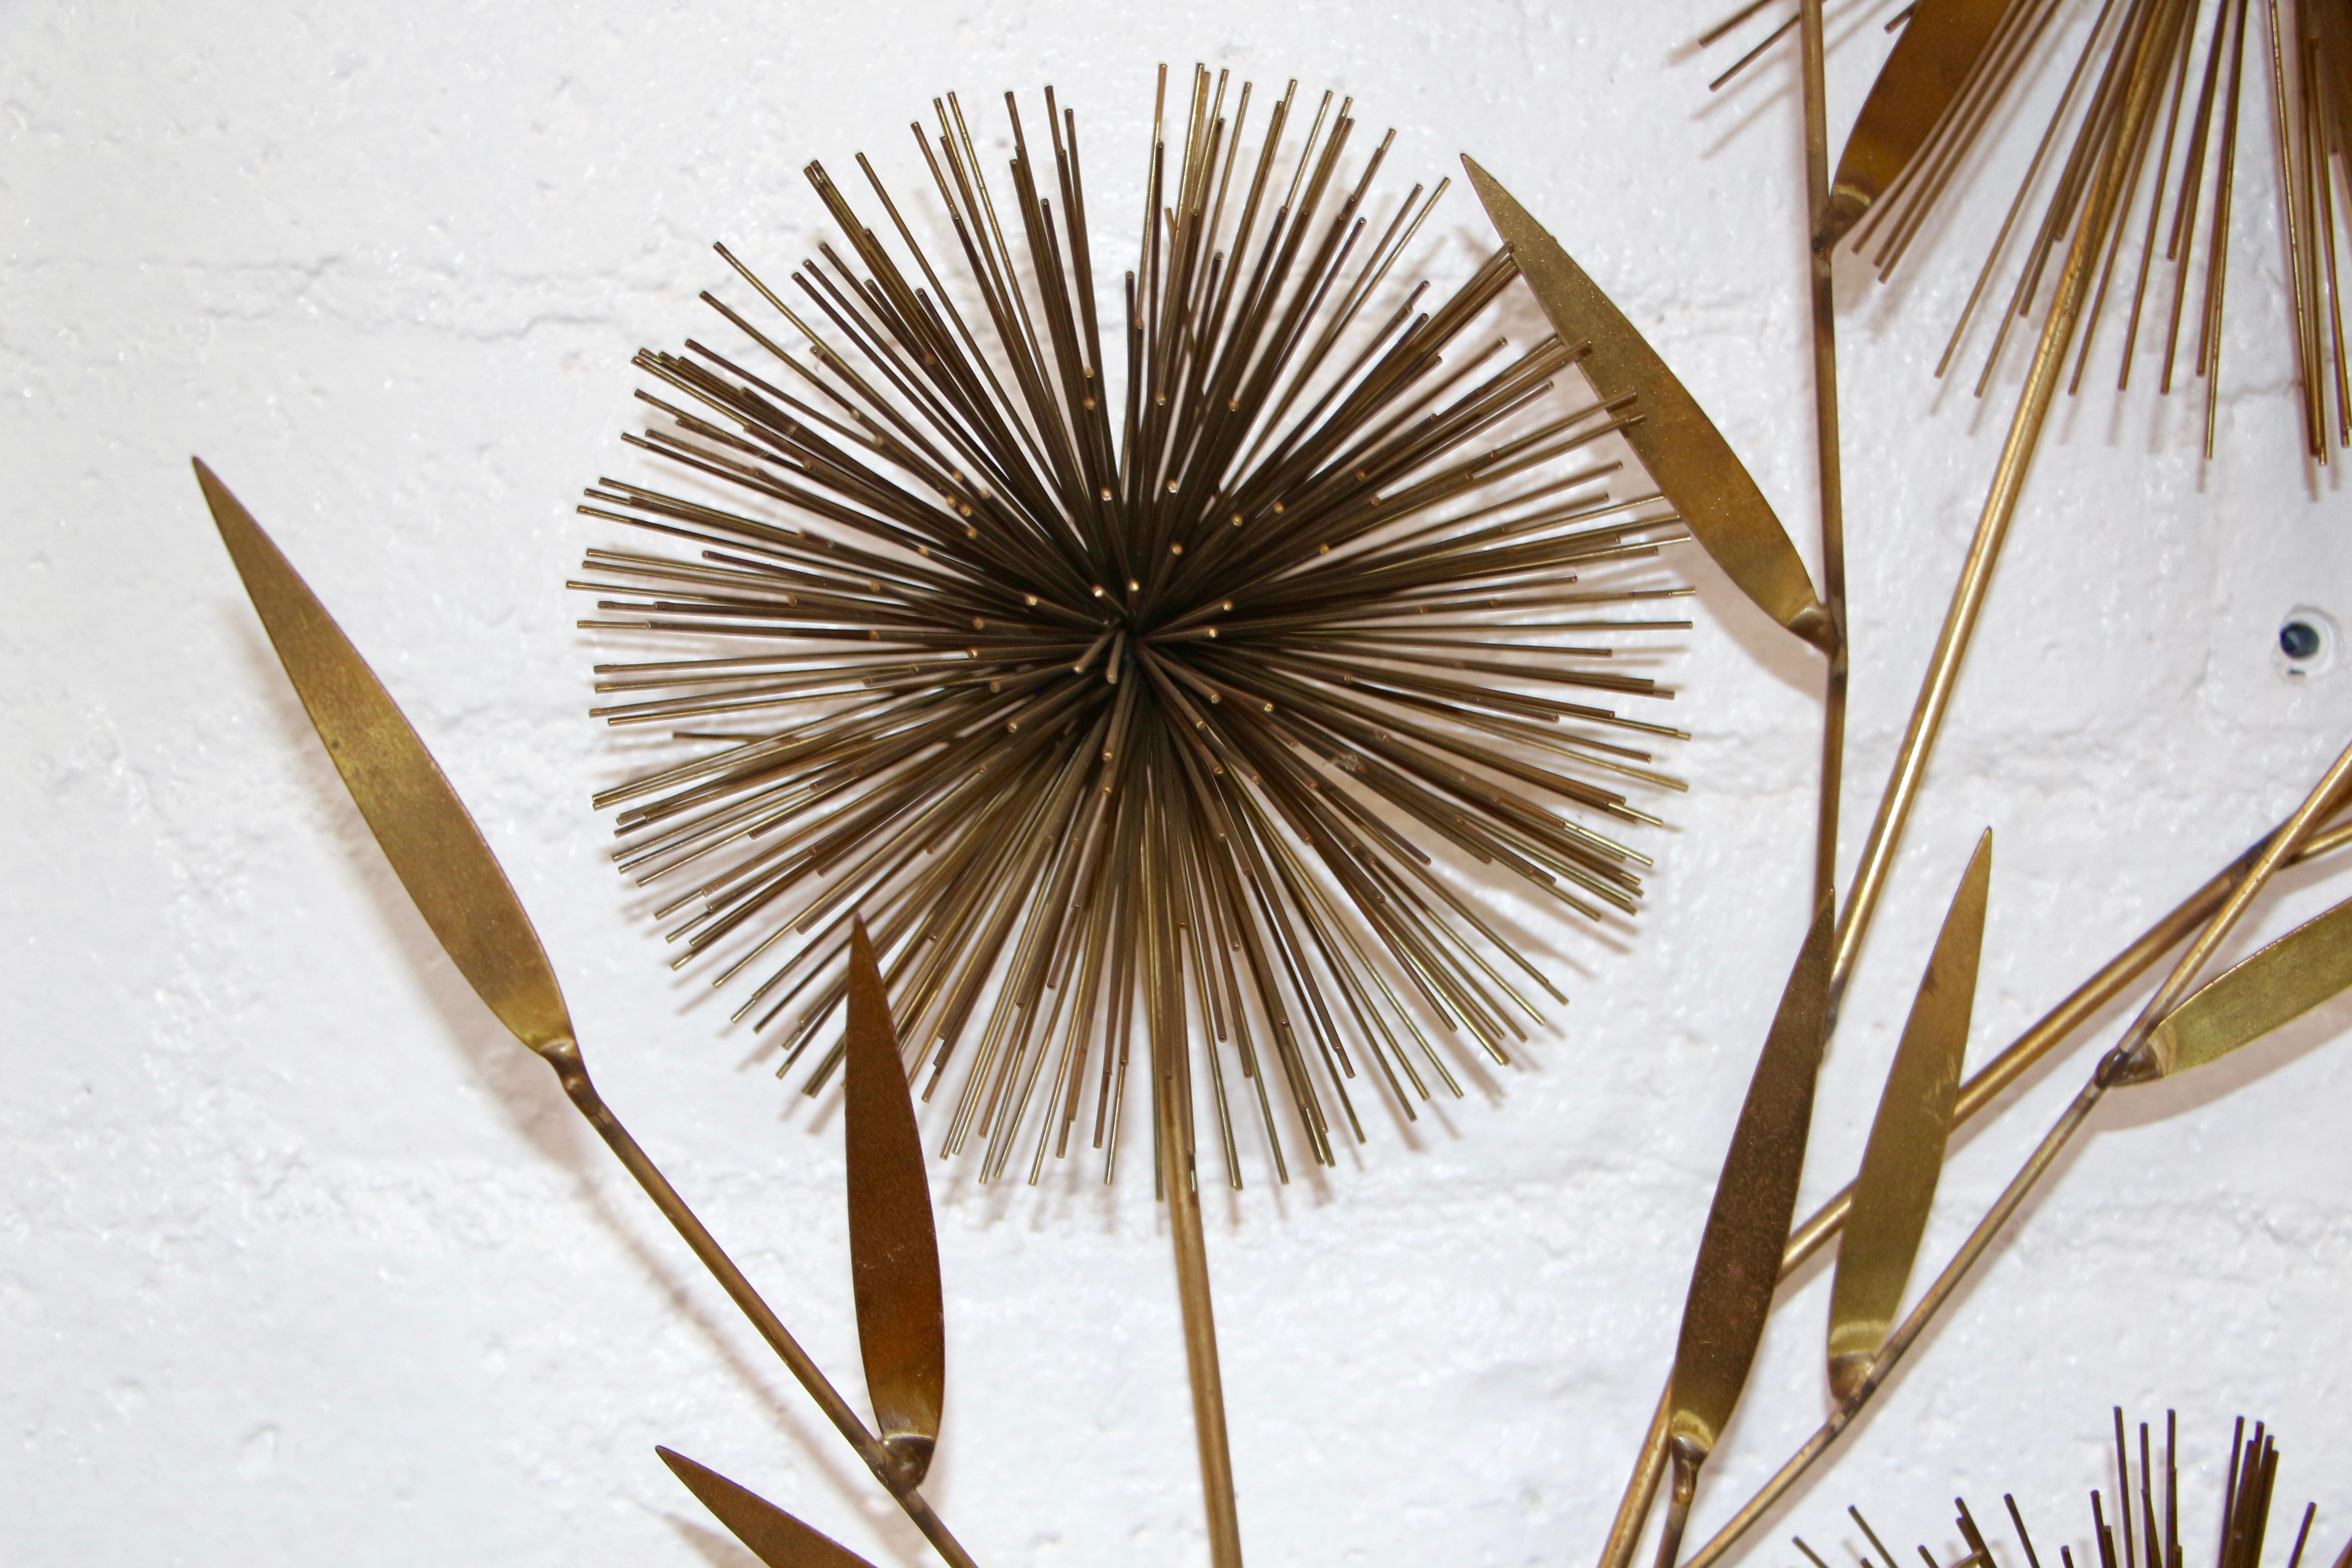 A signed Curtis Jere wall sculpture in the shape of a flower spray. They almost look like pom poms. Patinated metal with loses to the paint and patina. Signed and dated 1970.